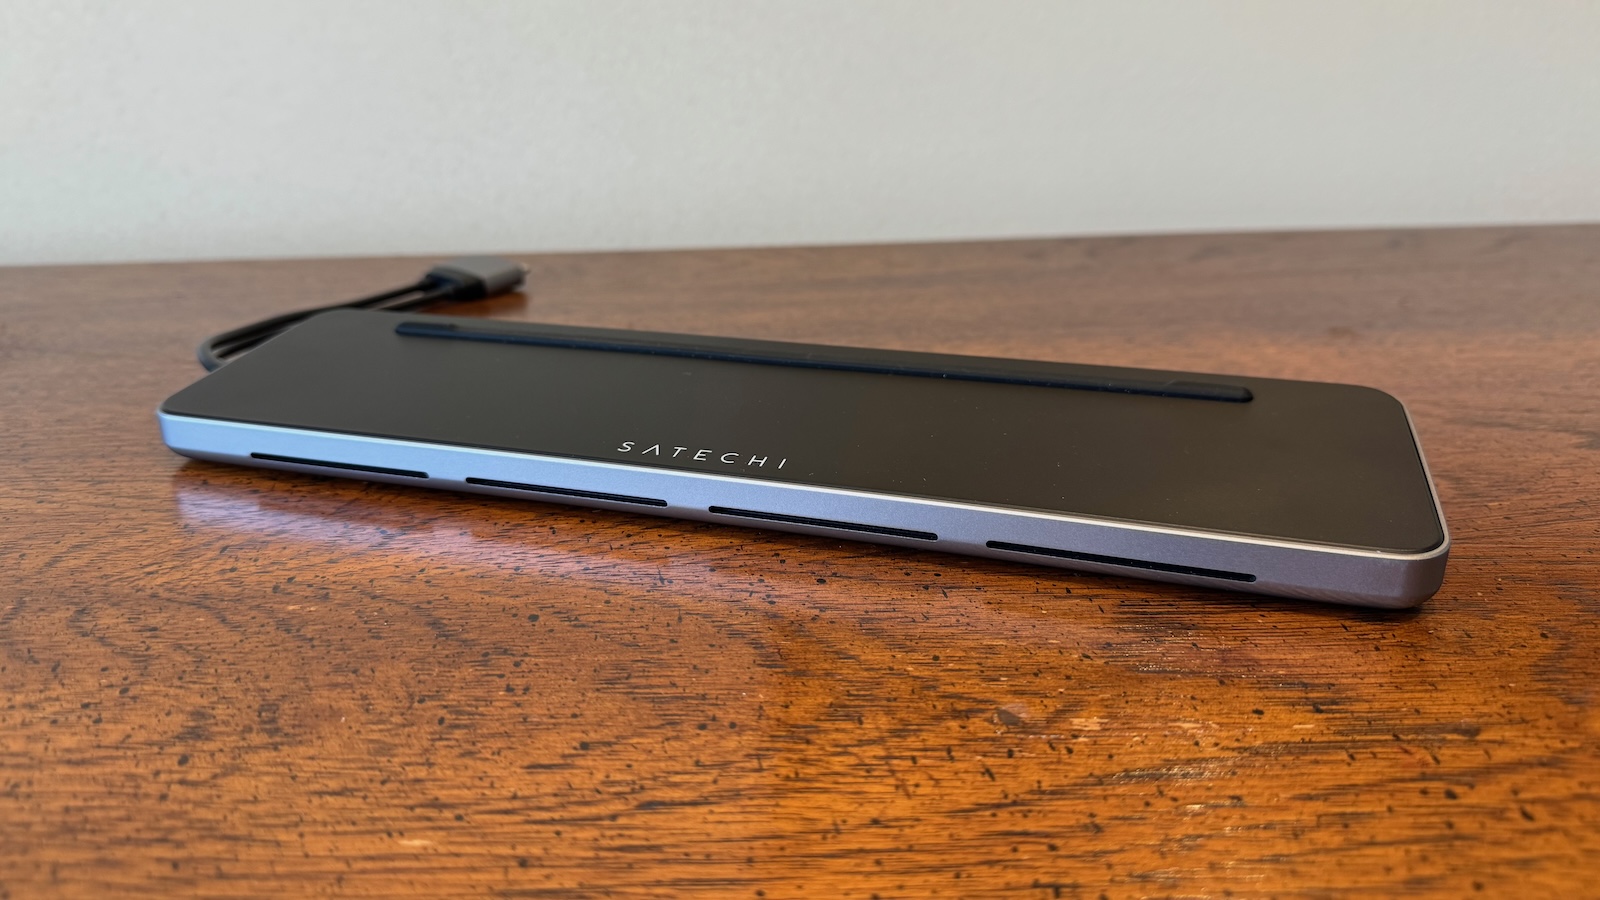 Review: Satechi's USB-C Dual Dock Stand Adds an Array of Ports and Even Room for Extra Storage to Your MacBook